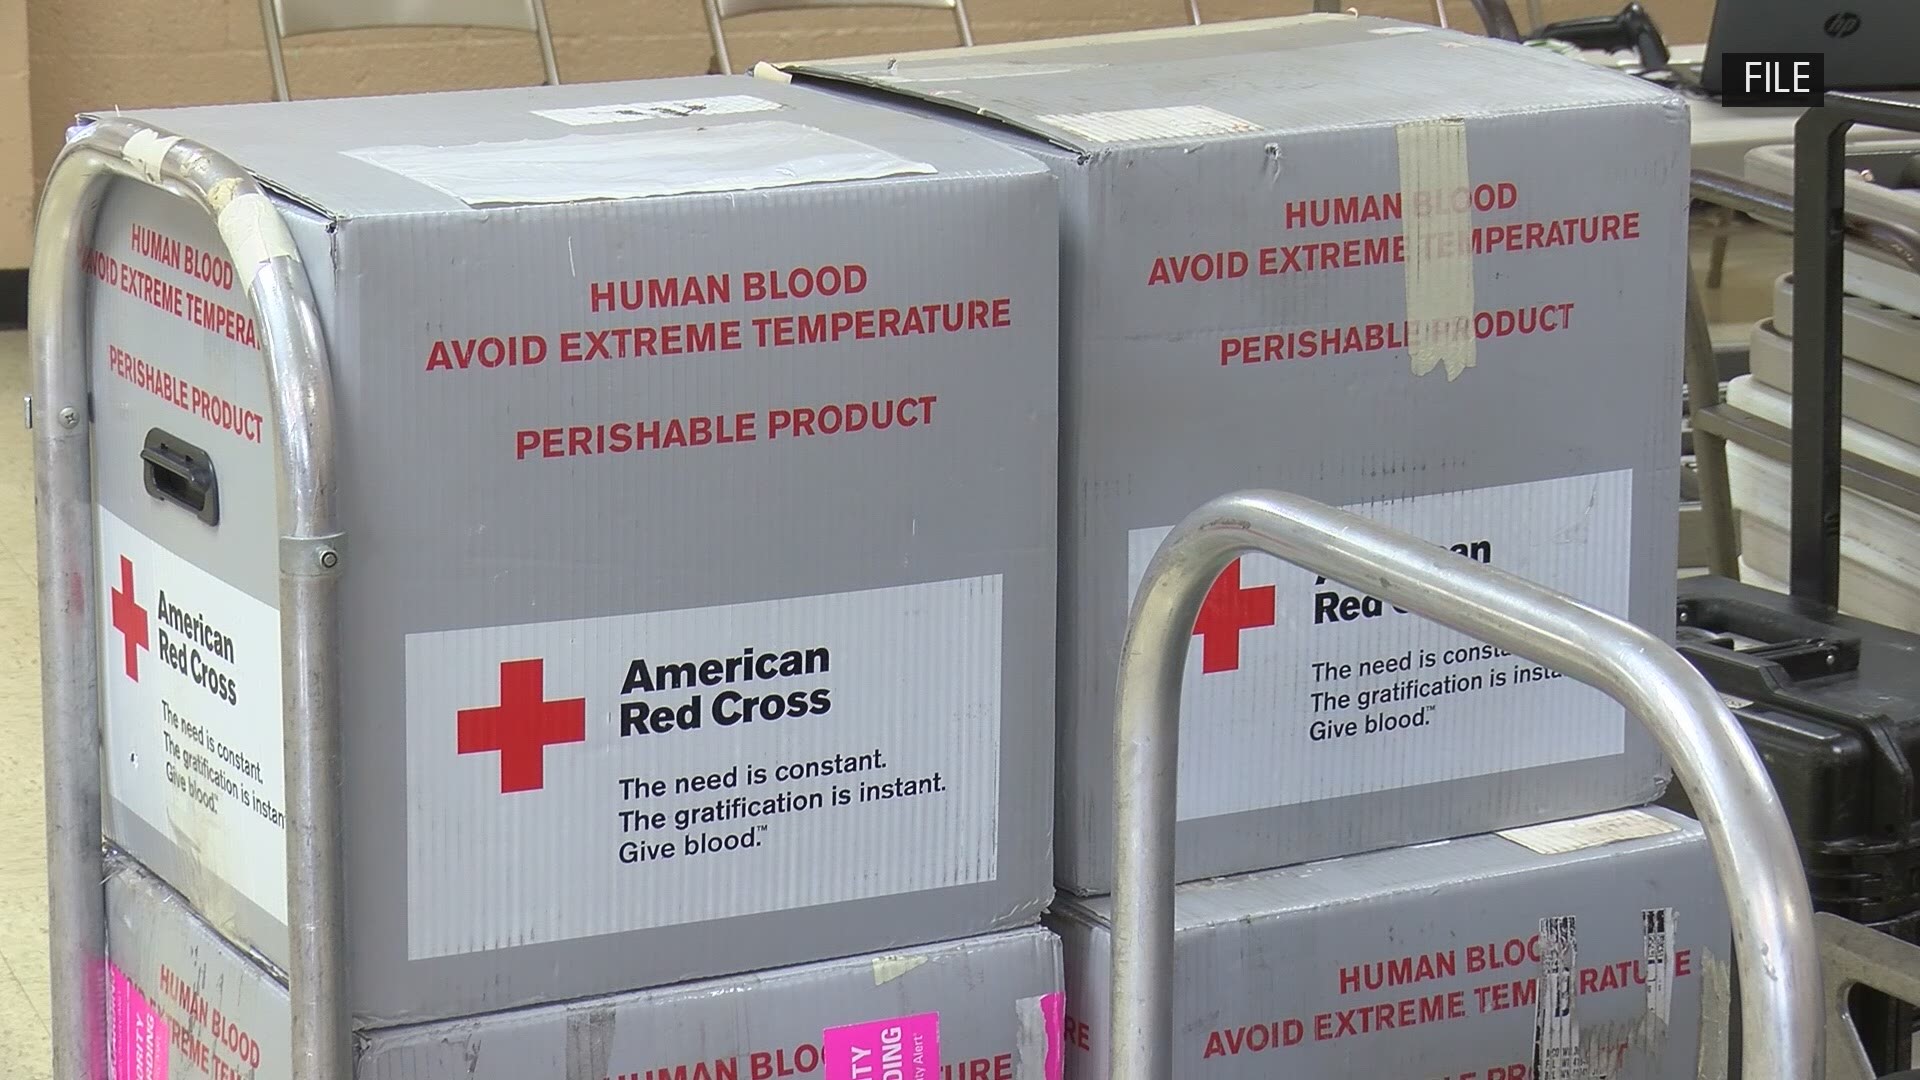 Nationally, blood donations have slowed due to the holiday season.